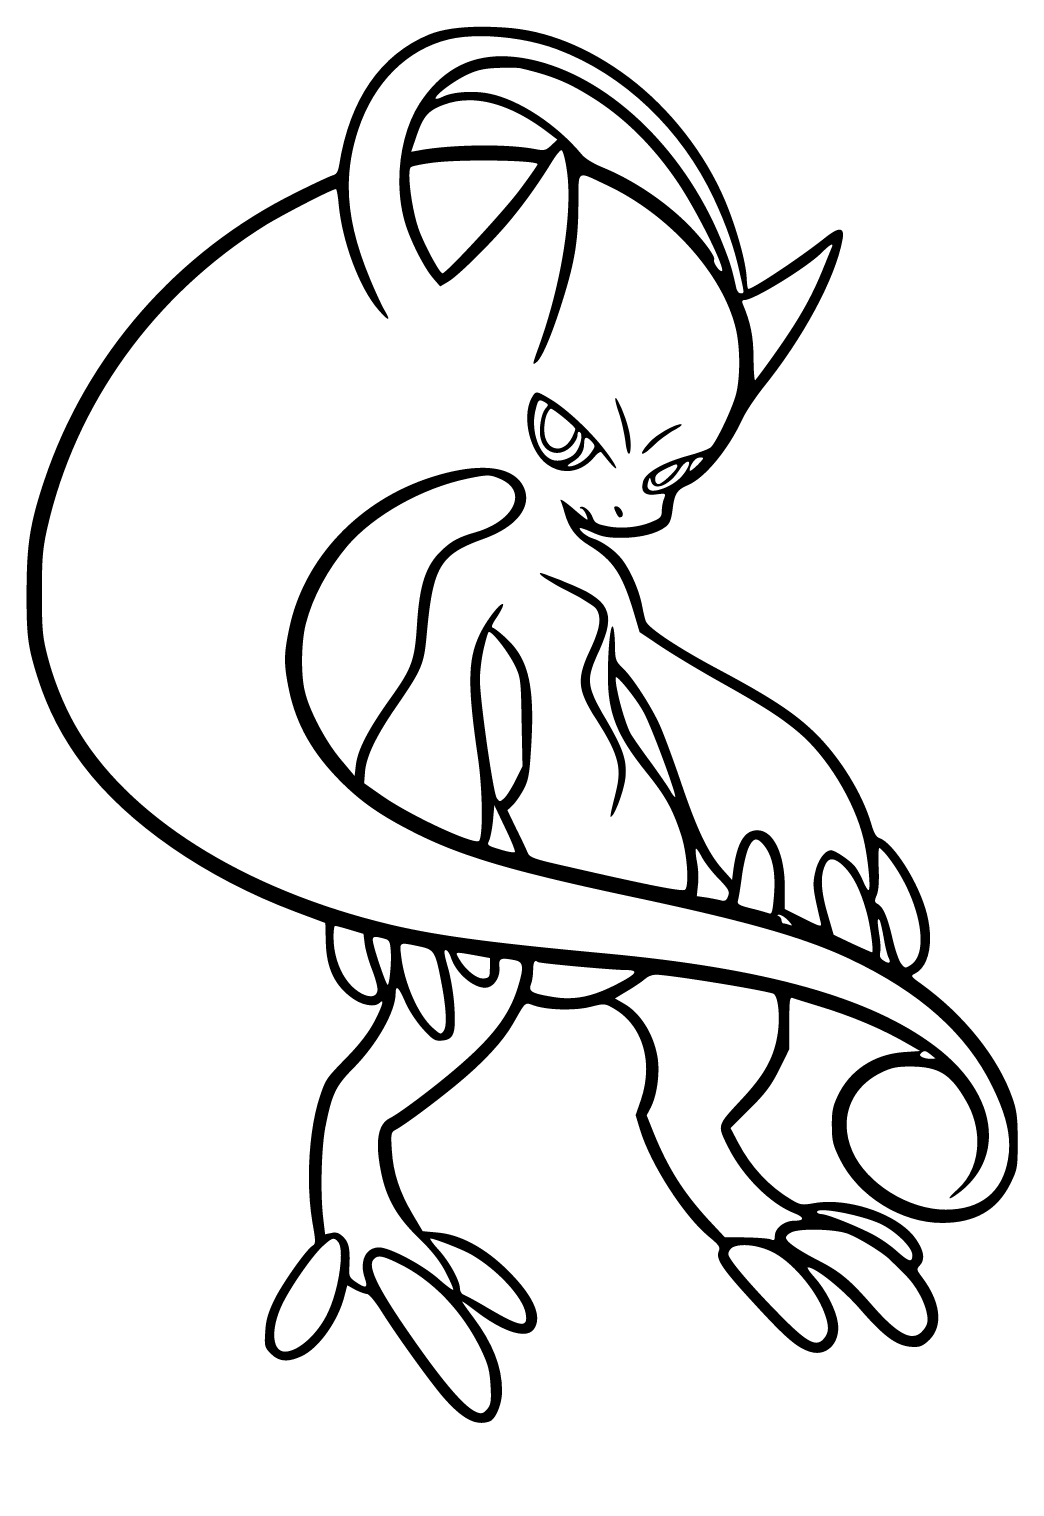 Drawing Of Mewtwo Coloring Page - Download & Print Online Coloring Pages  for Free, Color Nimbus